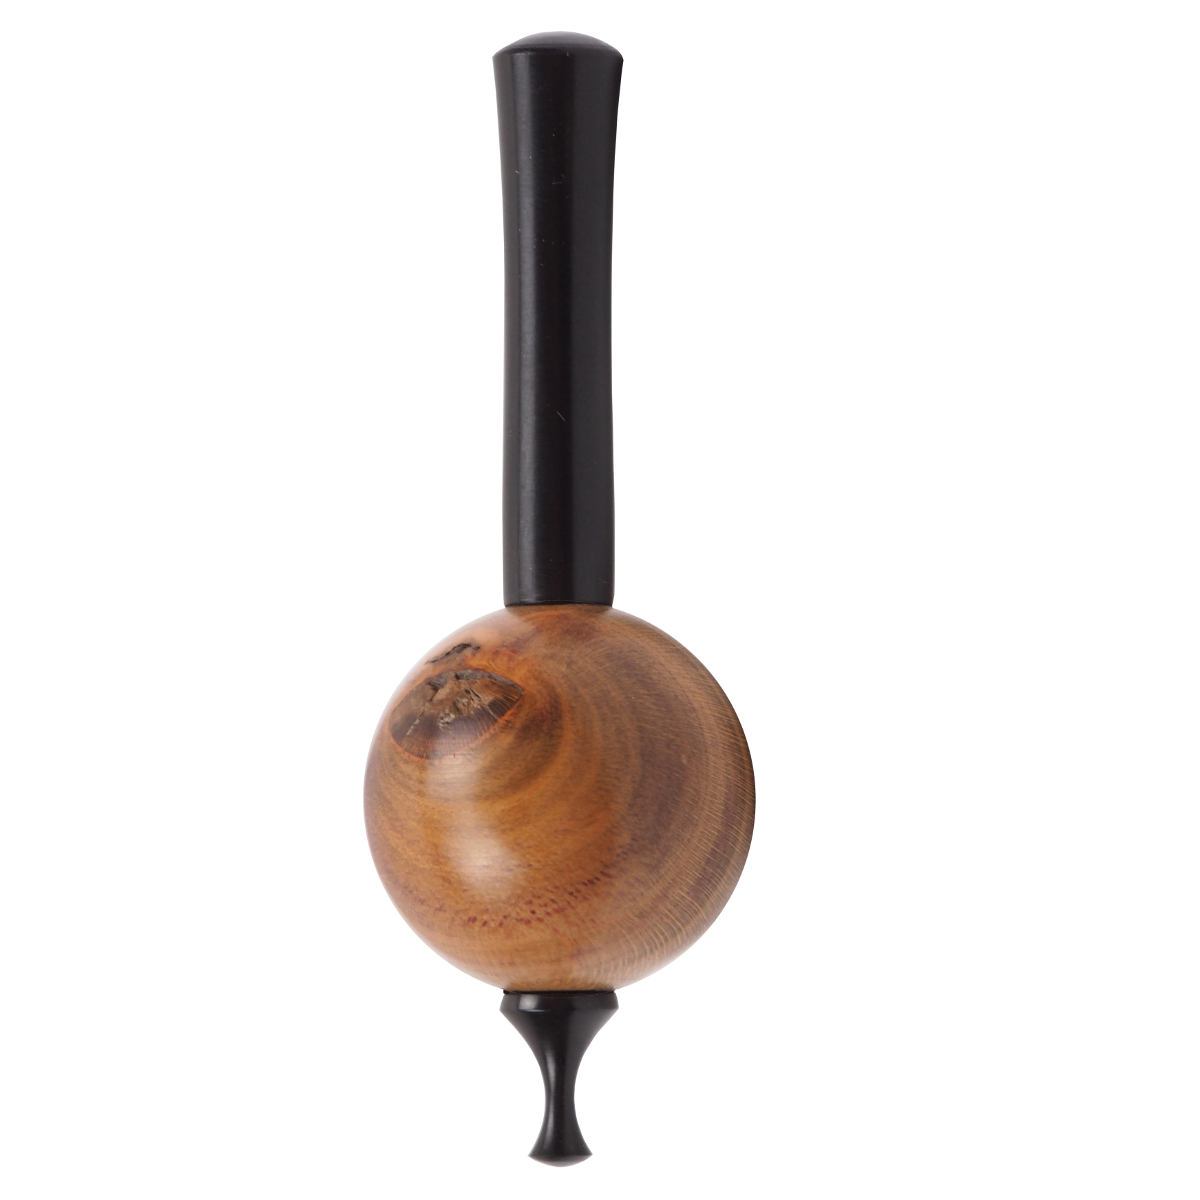 Handcrafted Wooden Spinning Top "Drummer" with Spherical Body